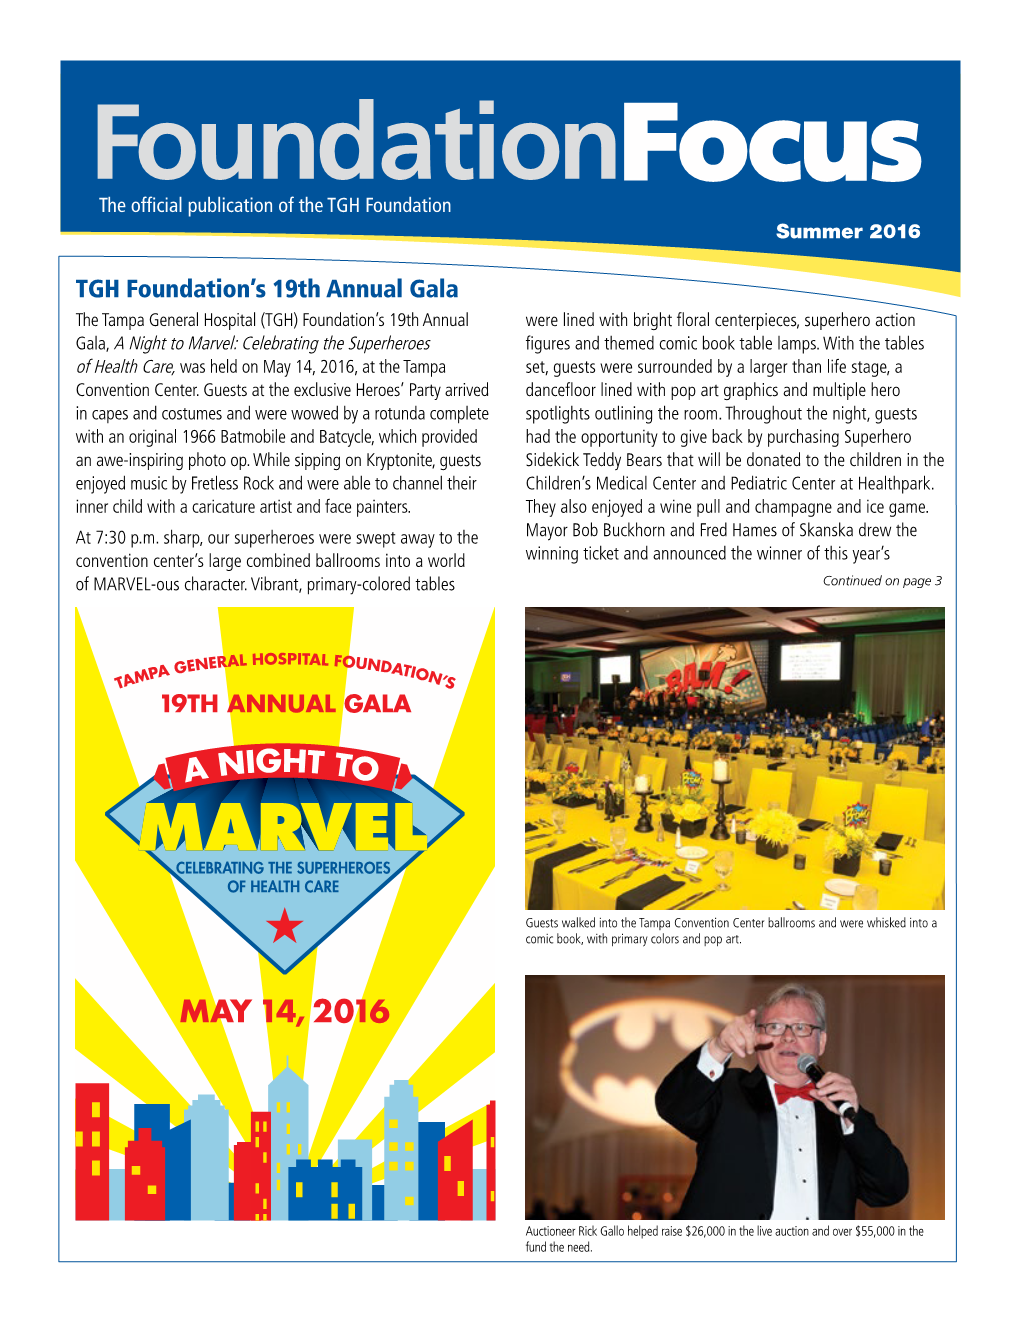 Foundationfocus the Official Publication of the TGH Foundation Summer 2016